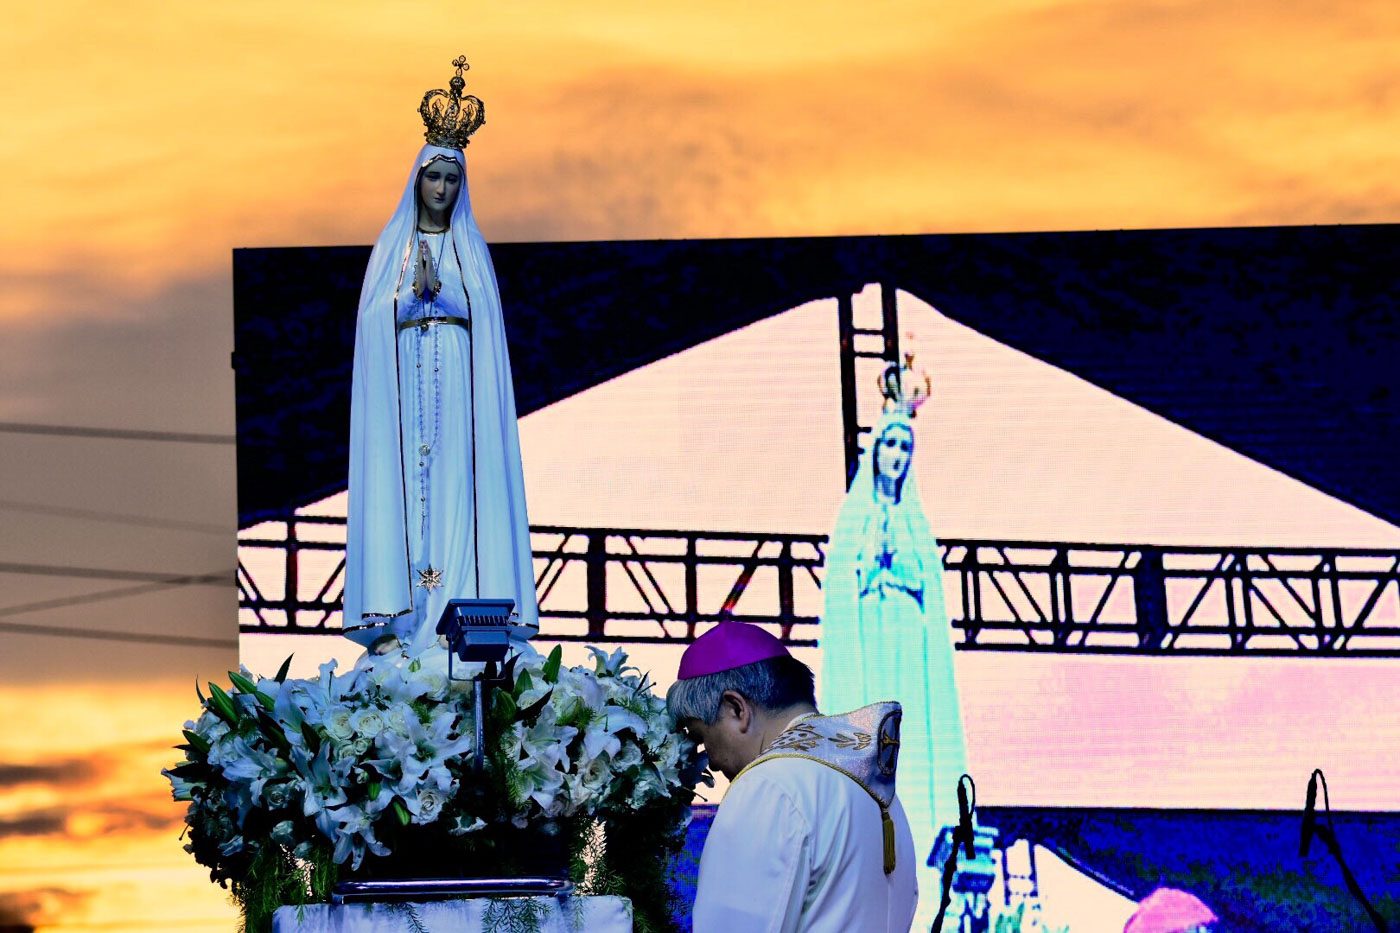 MOTHER AND SON. Lingayen-Dagupan Archbishop Socrates Villegas prays before an image of Our Lady of Fatima in an anti-EJK event at the People Power Monument on November 5, 2017. Photo by Angie de Silva/Rappler 